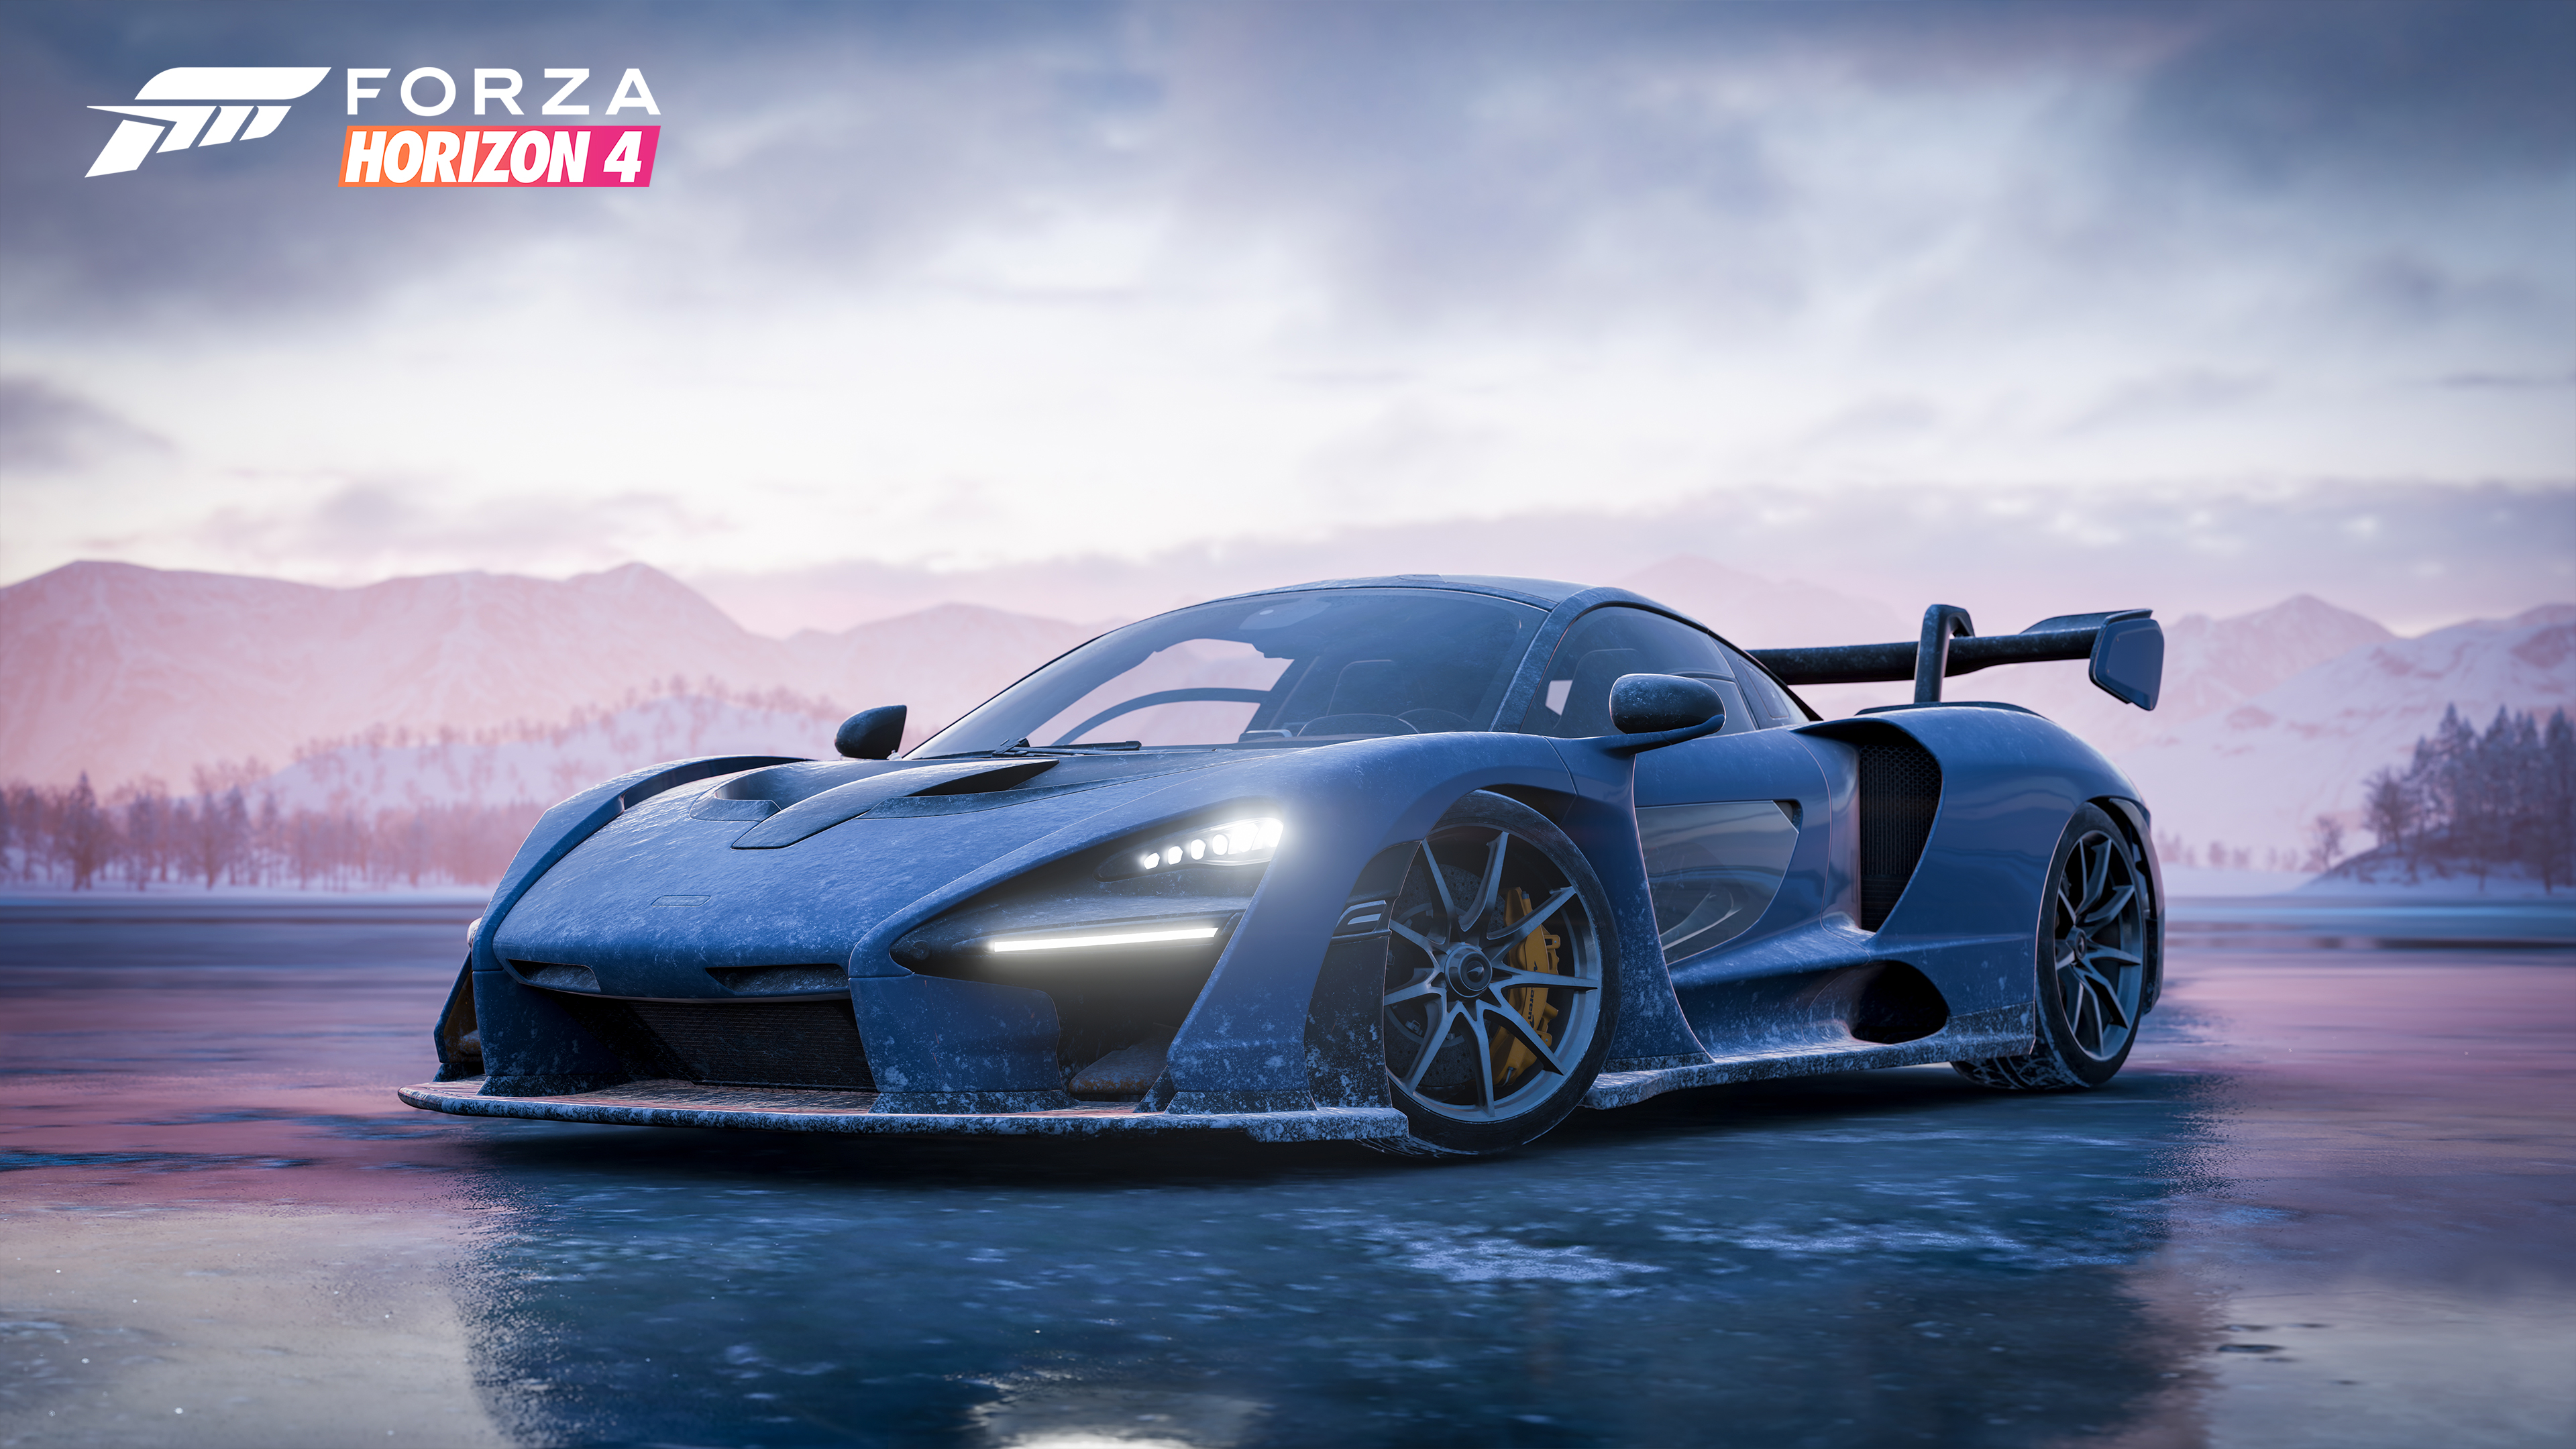 Download Forza Horizon 4 wallpapers for mobile phone free Forza Horizon  4 HD pictures